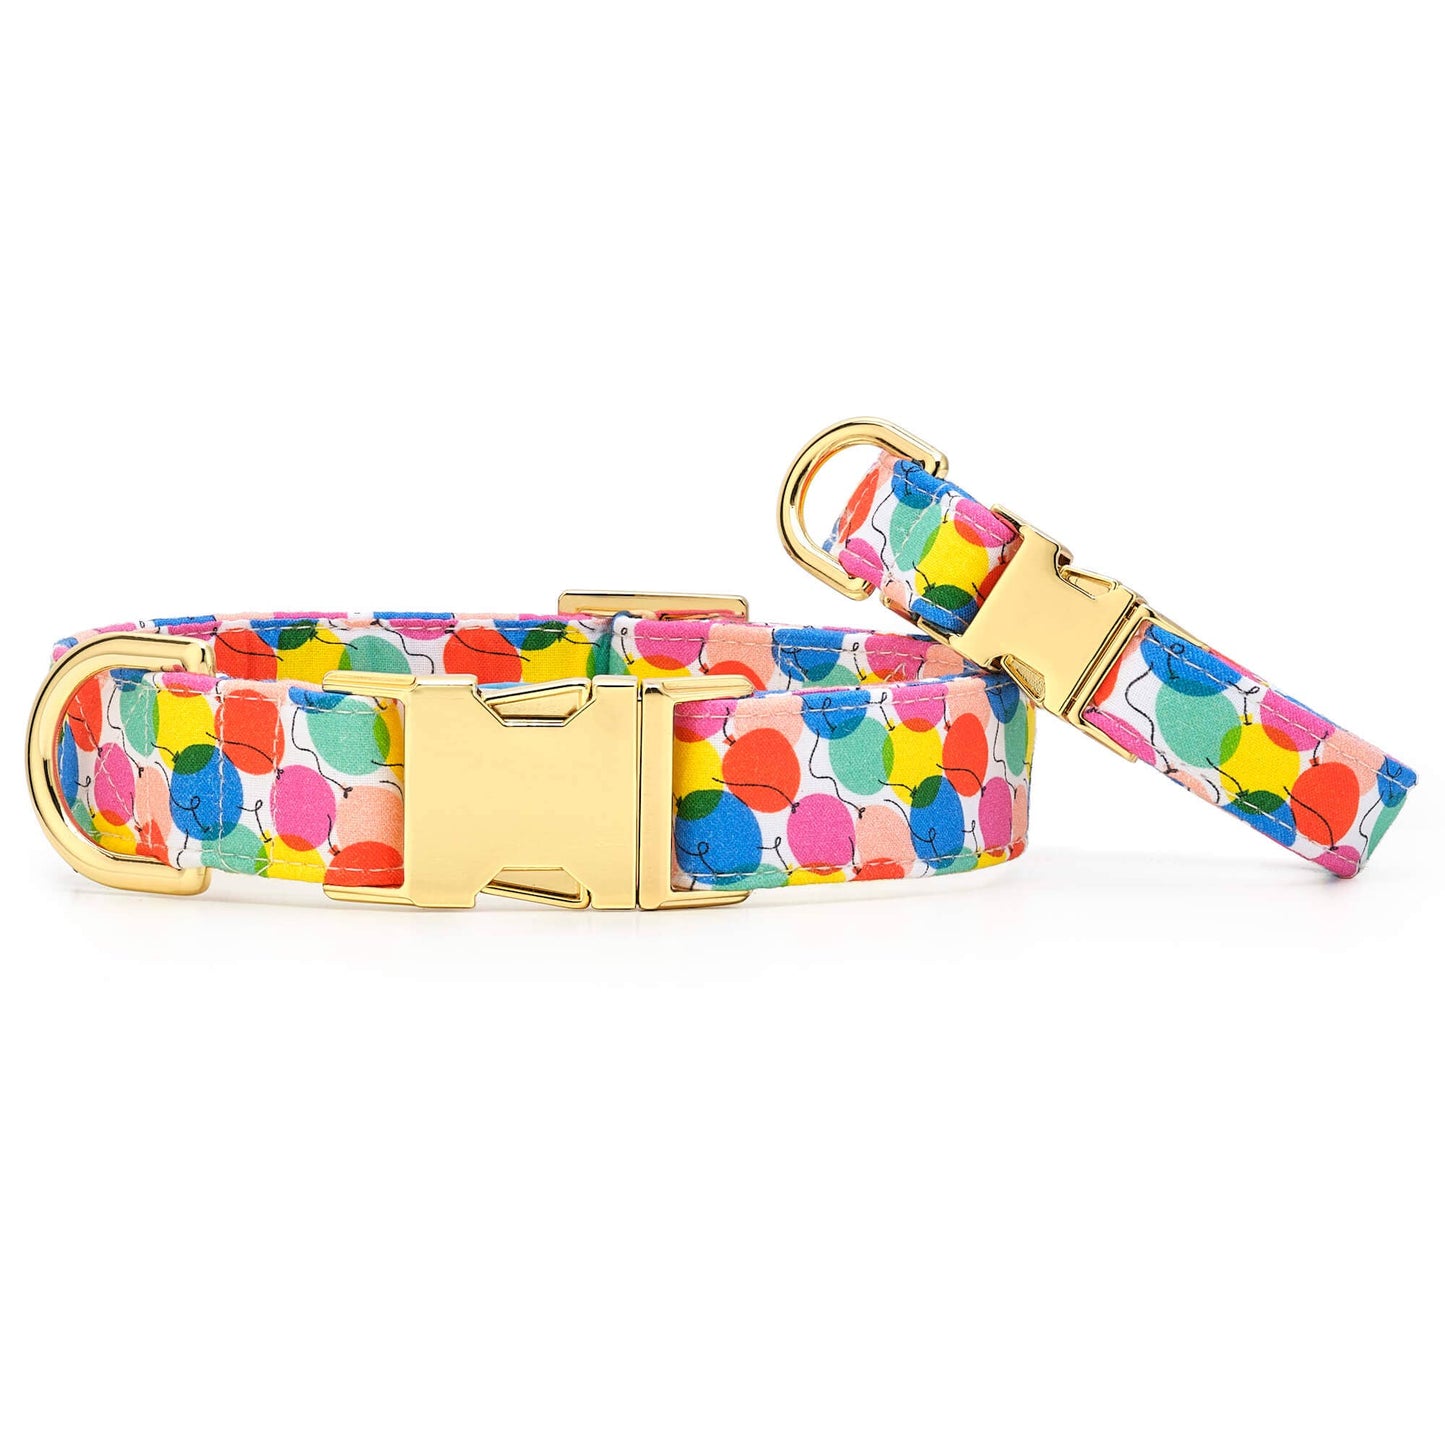 Pup, Pup, and Away Birthday Dog Collar: XS/ Gold